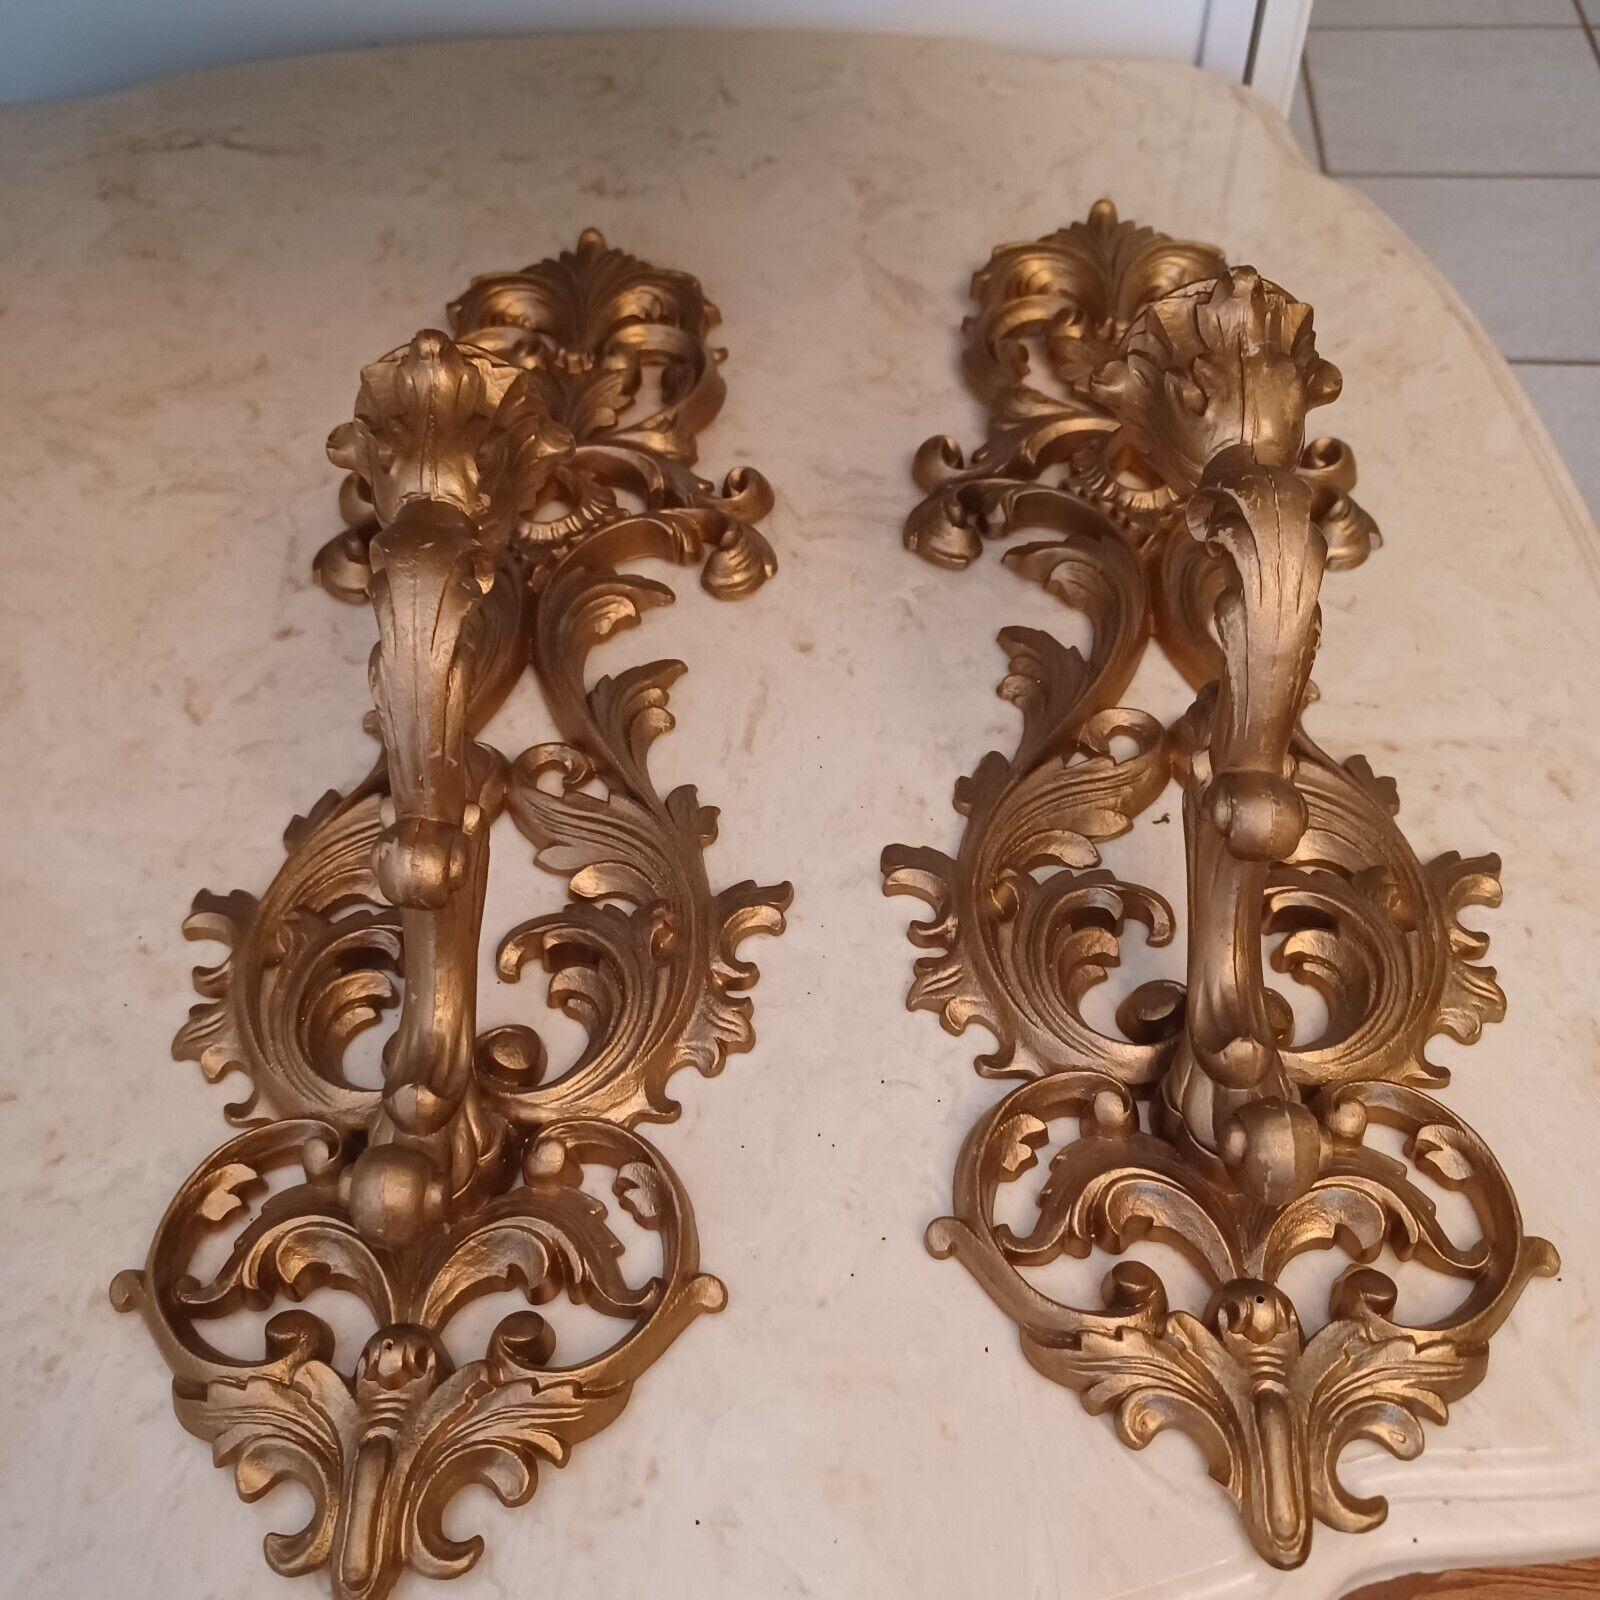 Vintage Pair Gold Ornate Resin Wall Sconce Candle Holder